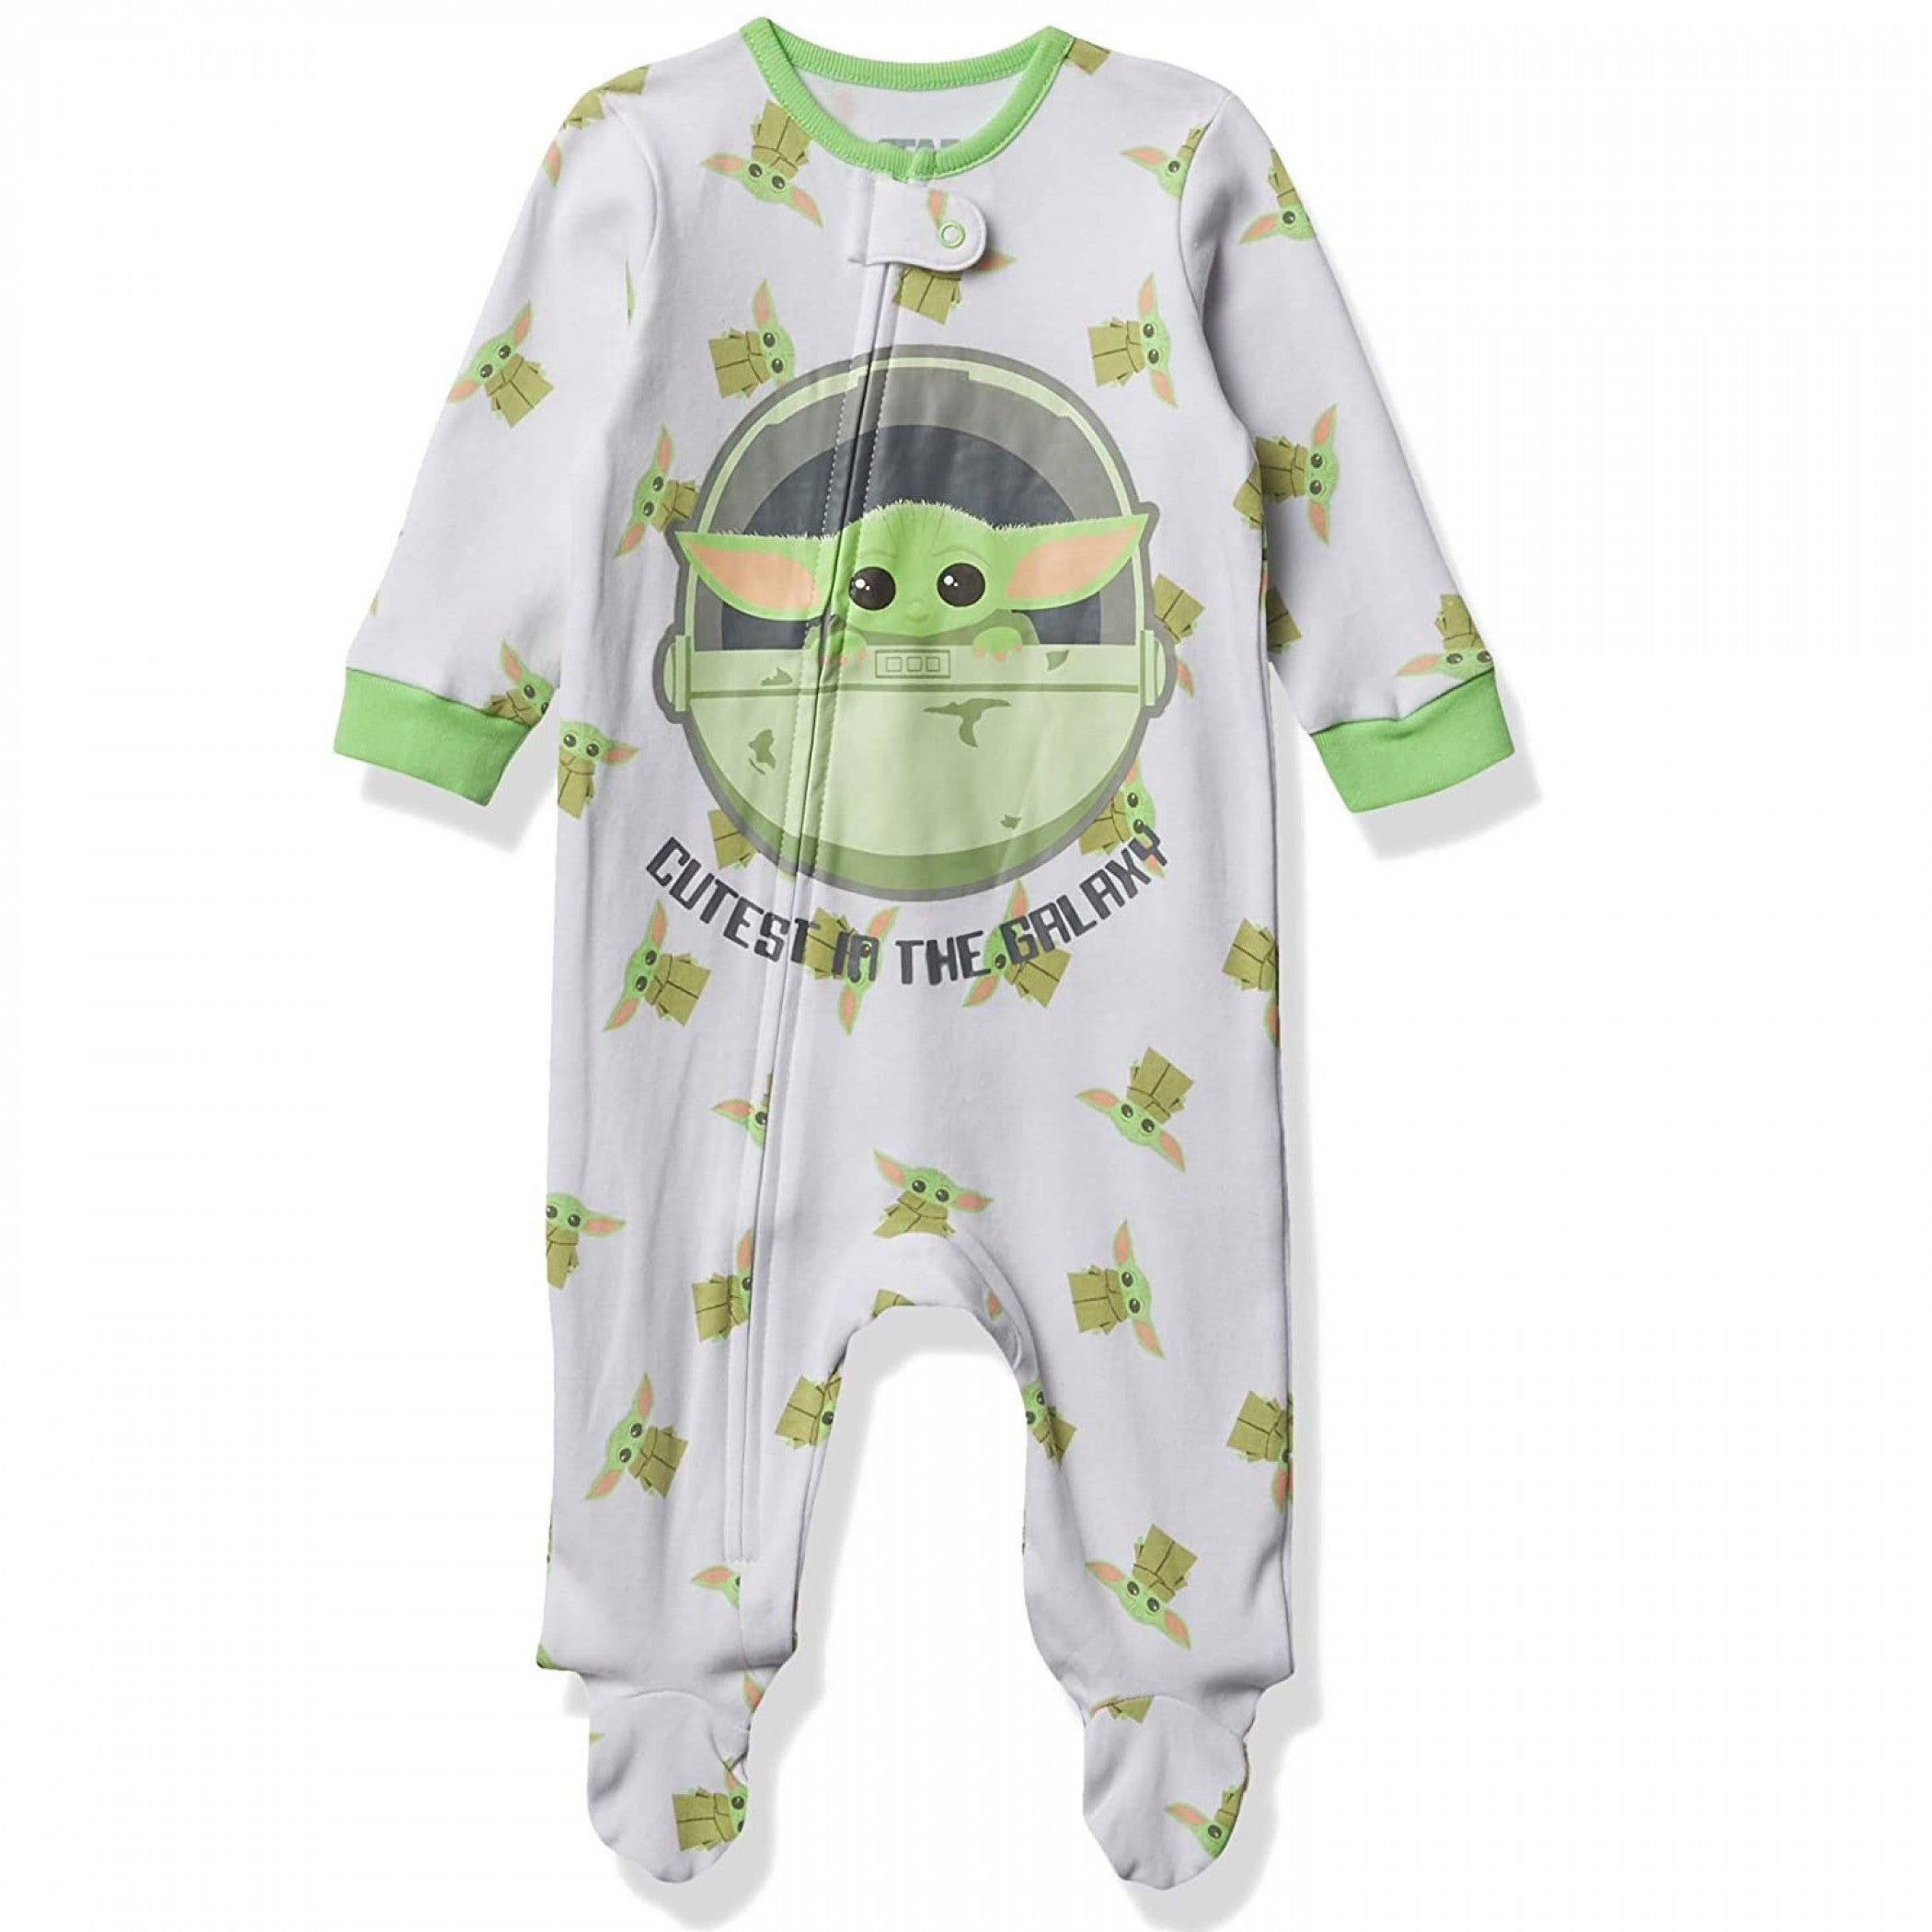 Star Wars The Child Cutest in the Galaxy Infant Sleeper